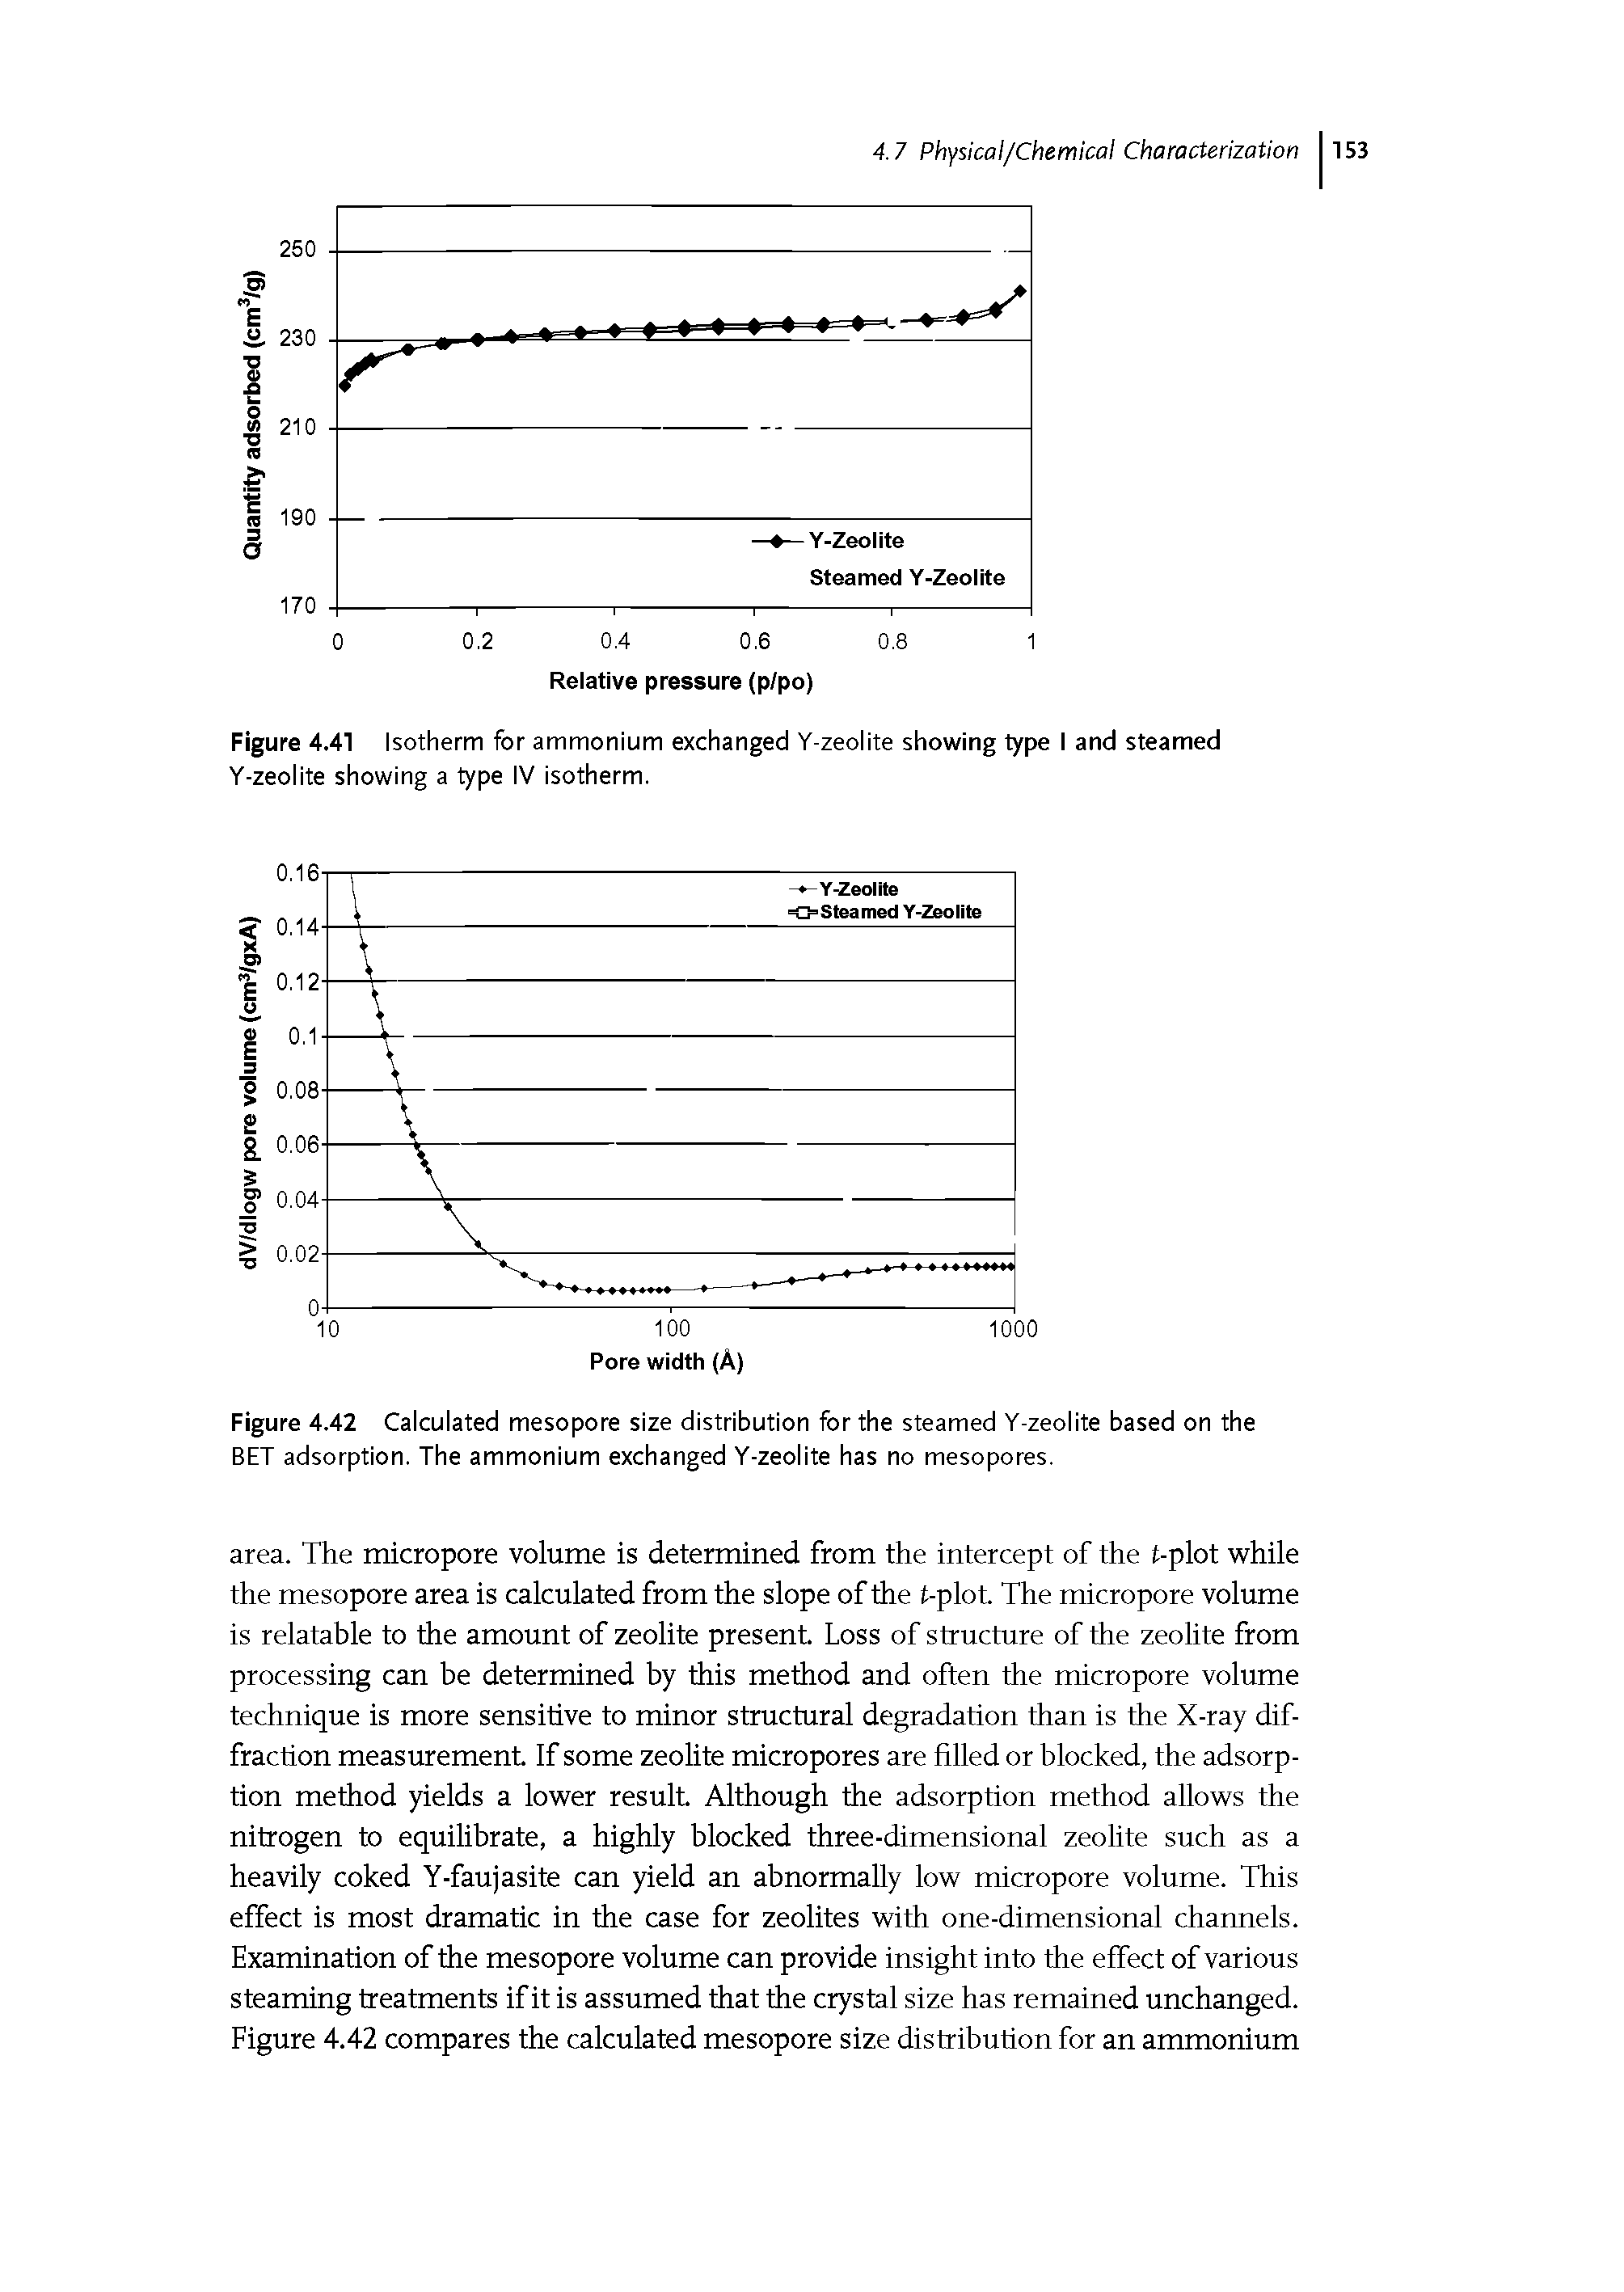 Figure 4.41 Isotherm for ammonium exchanged Y-zeolite showing type I and steamed Y-zeolite showing a type iV isotherm.